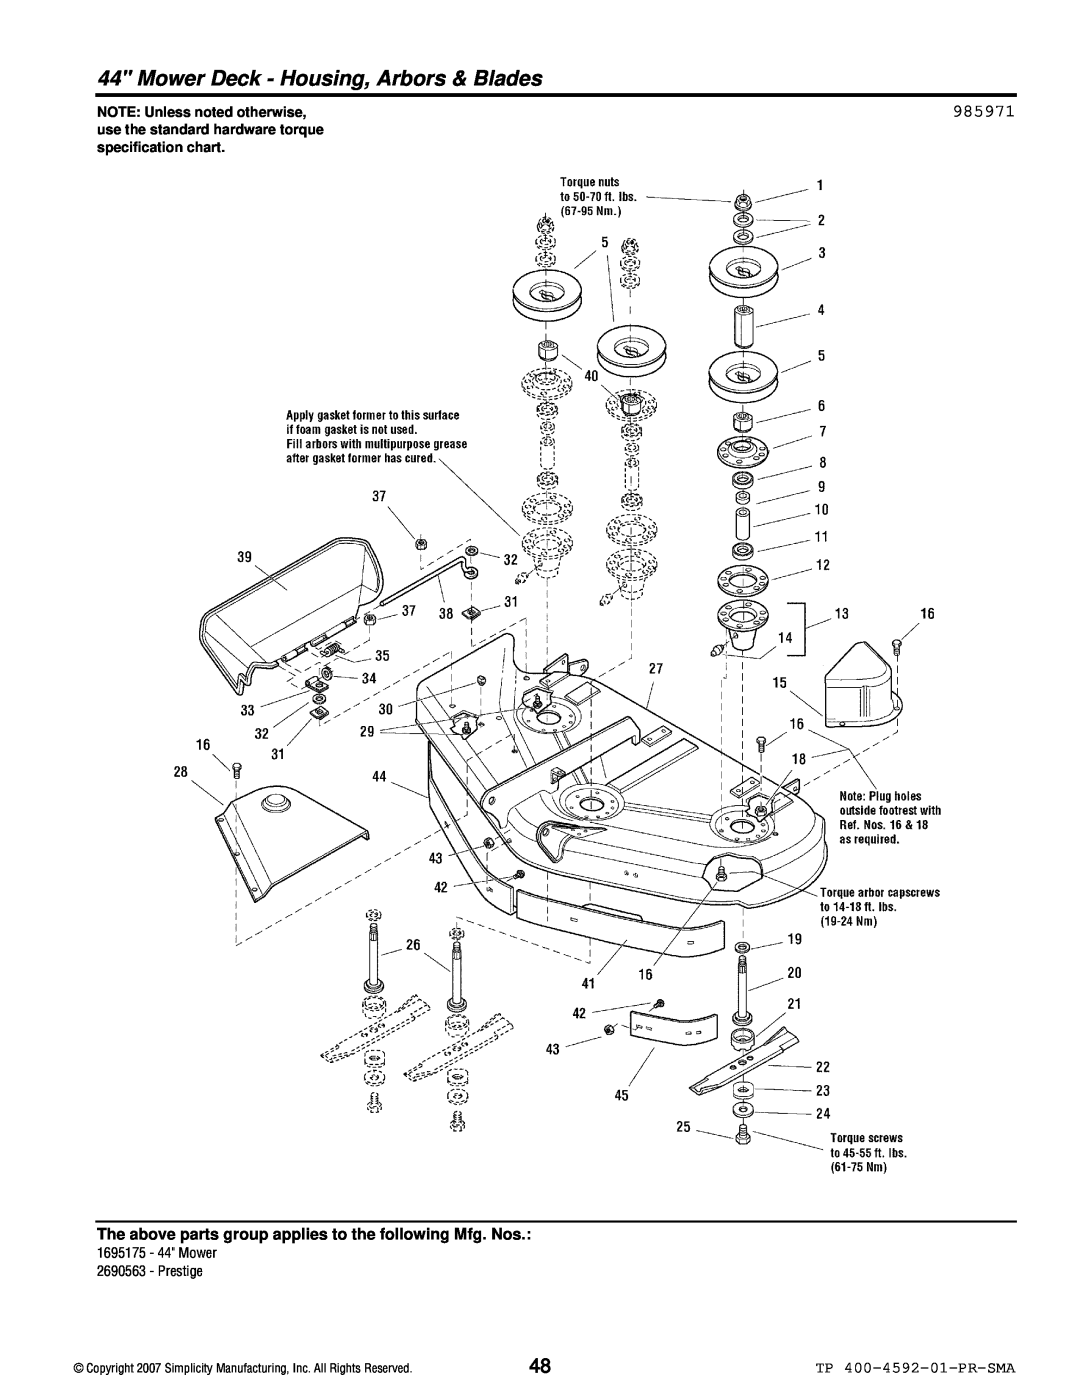 Simplicity 1800 Series Mower Deck - Housing, Arbors & Blades, 985971, TP 400-4592-01-PR-SMA, NOTE: Unless noted otherwise 